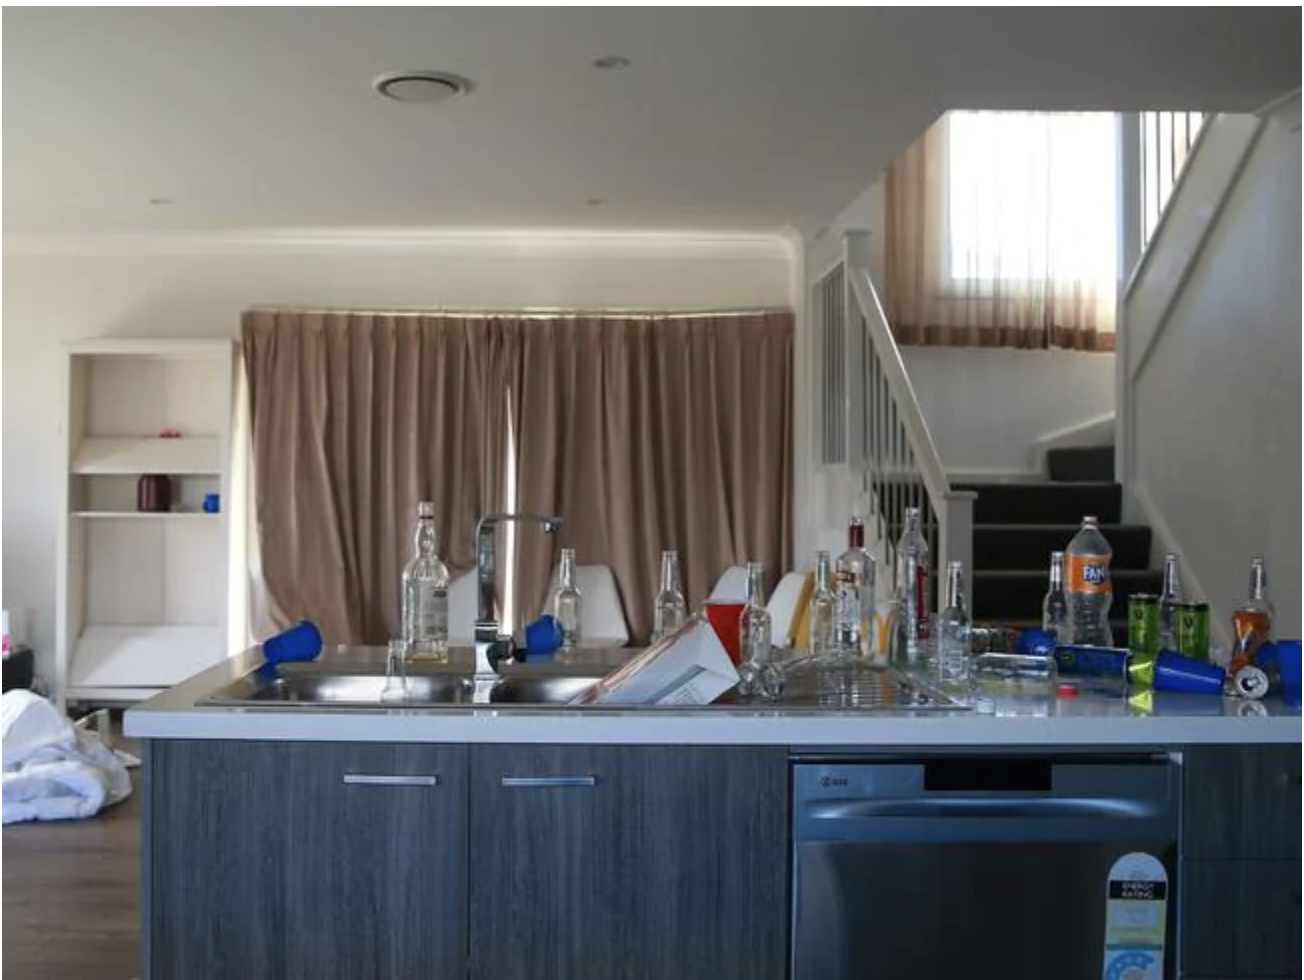  The hosts of the party had rented the property online. Picture: Justin LloydSource:News Corp Australia